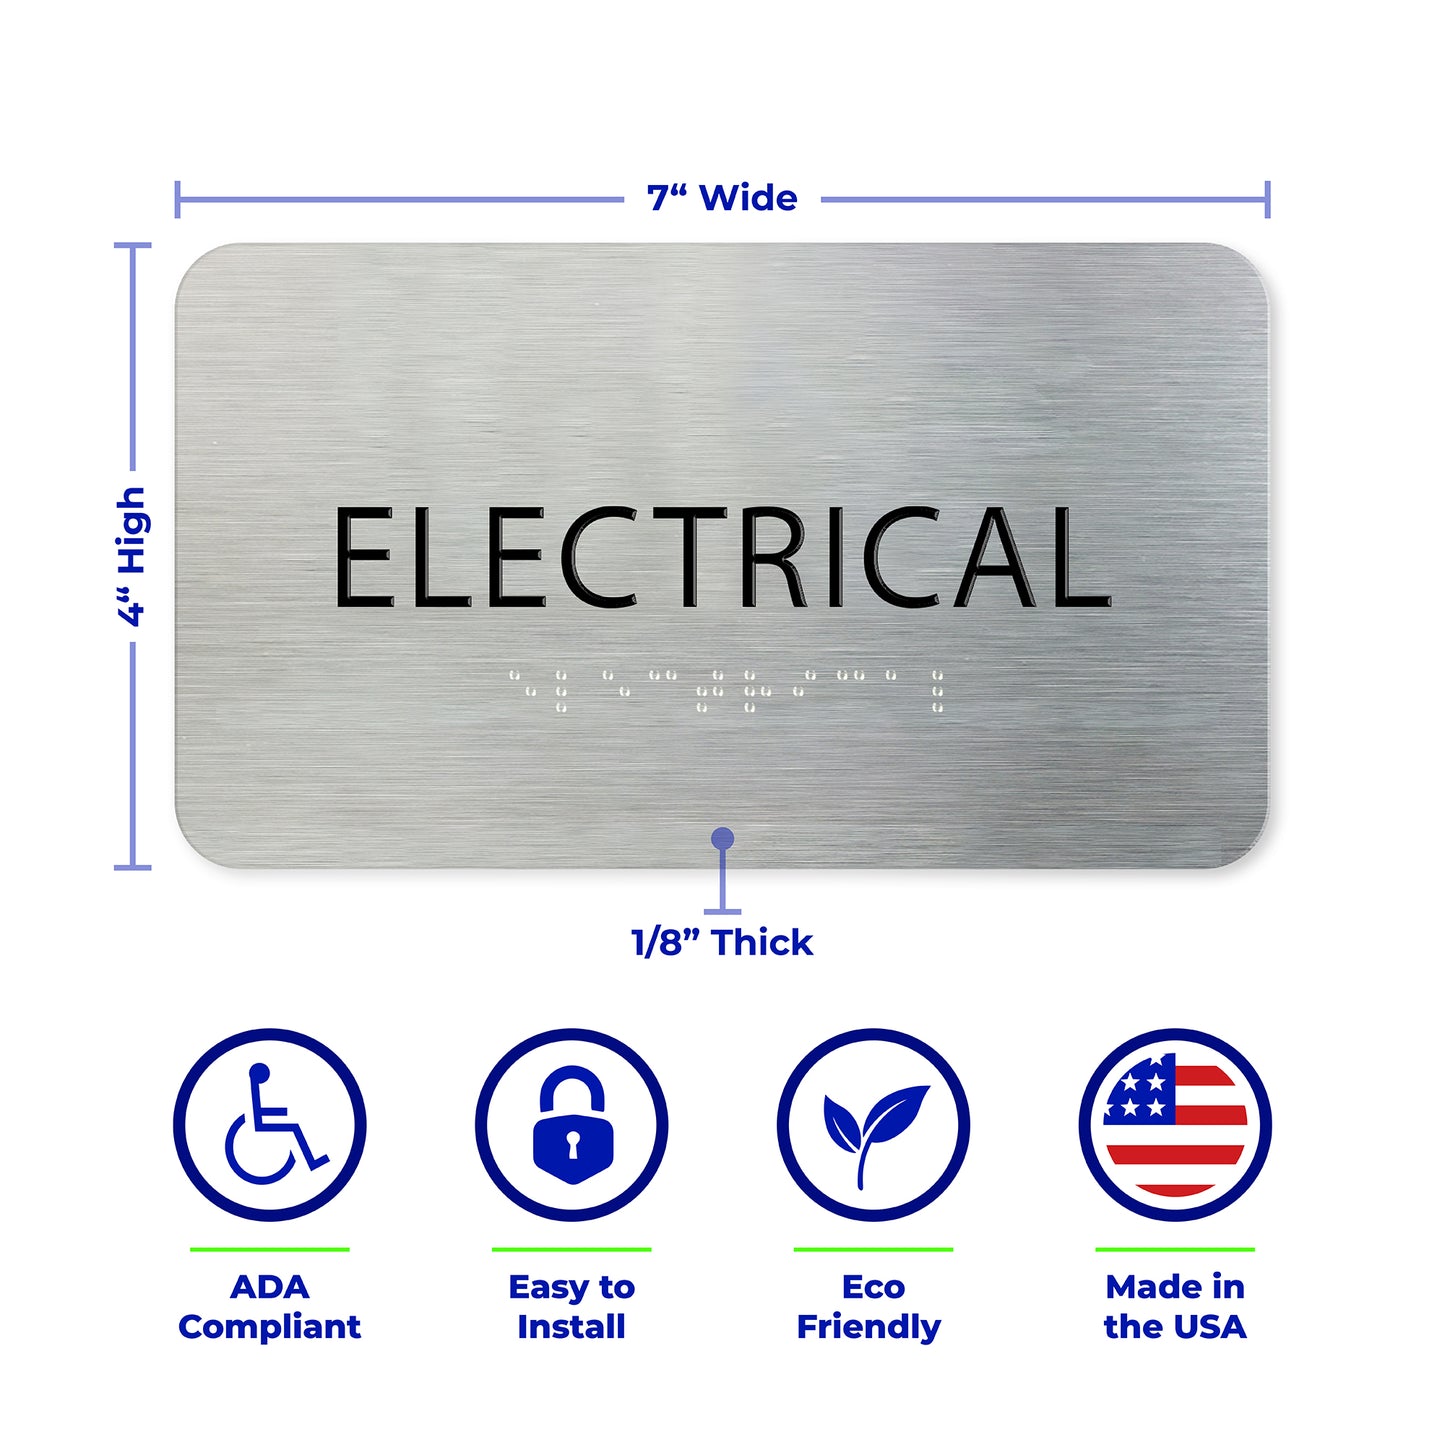 ELECTRICAL Room Sign, ADA Compliant, Electrical Closet Sign, Aluminum Brushed Silver, Black Raised Text, Grade 2 Braille, size 7" x 4